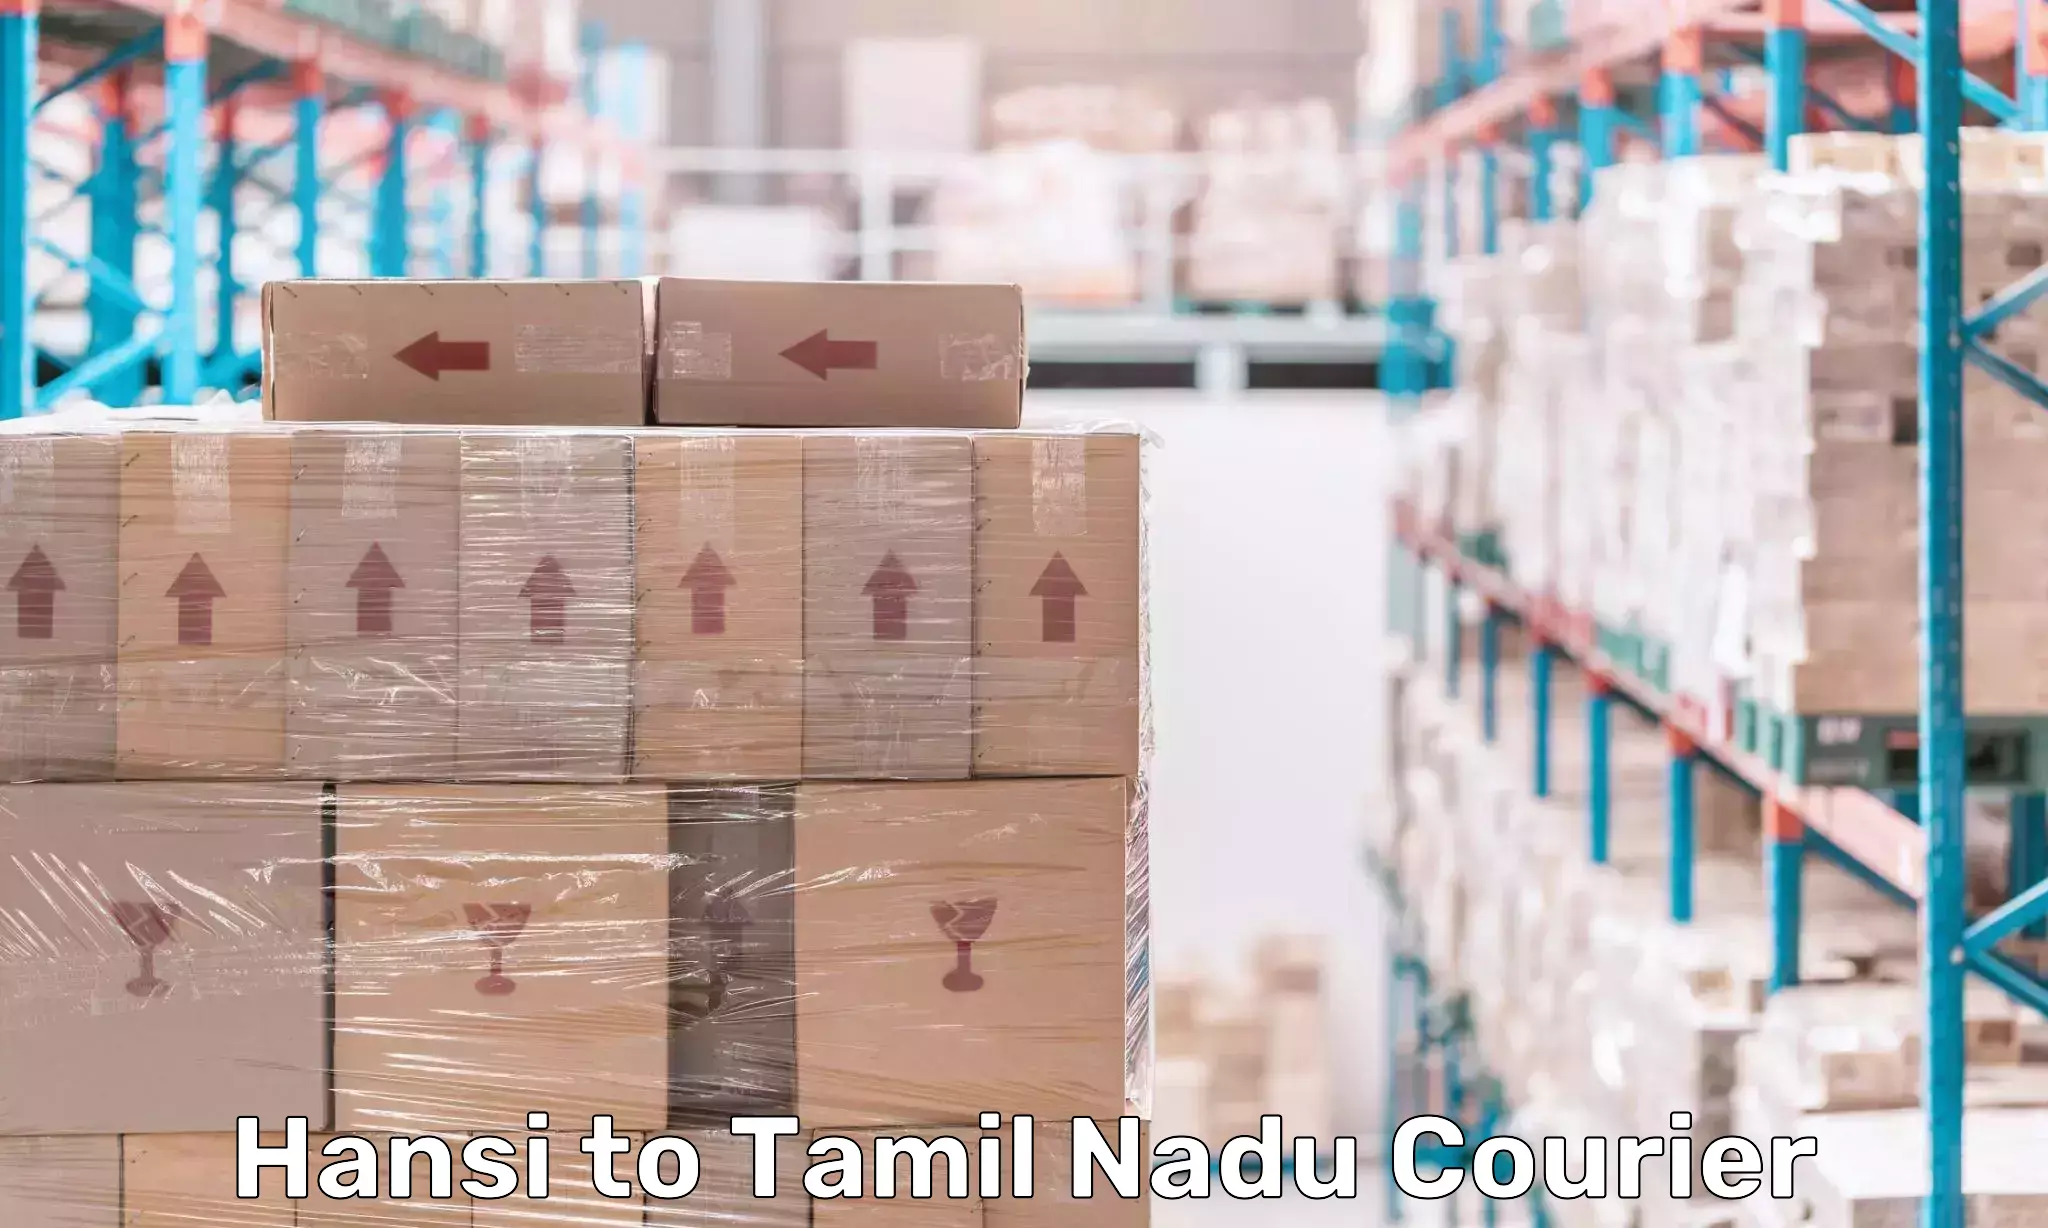 Same-day delivery solutions Hansi to Tamil Nadu